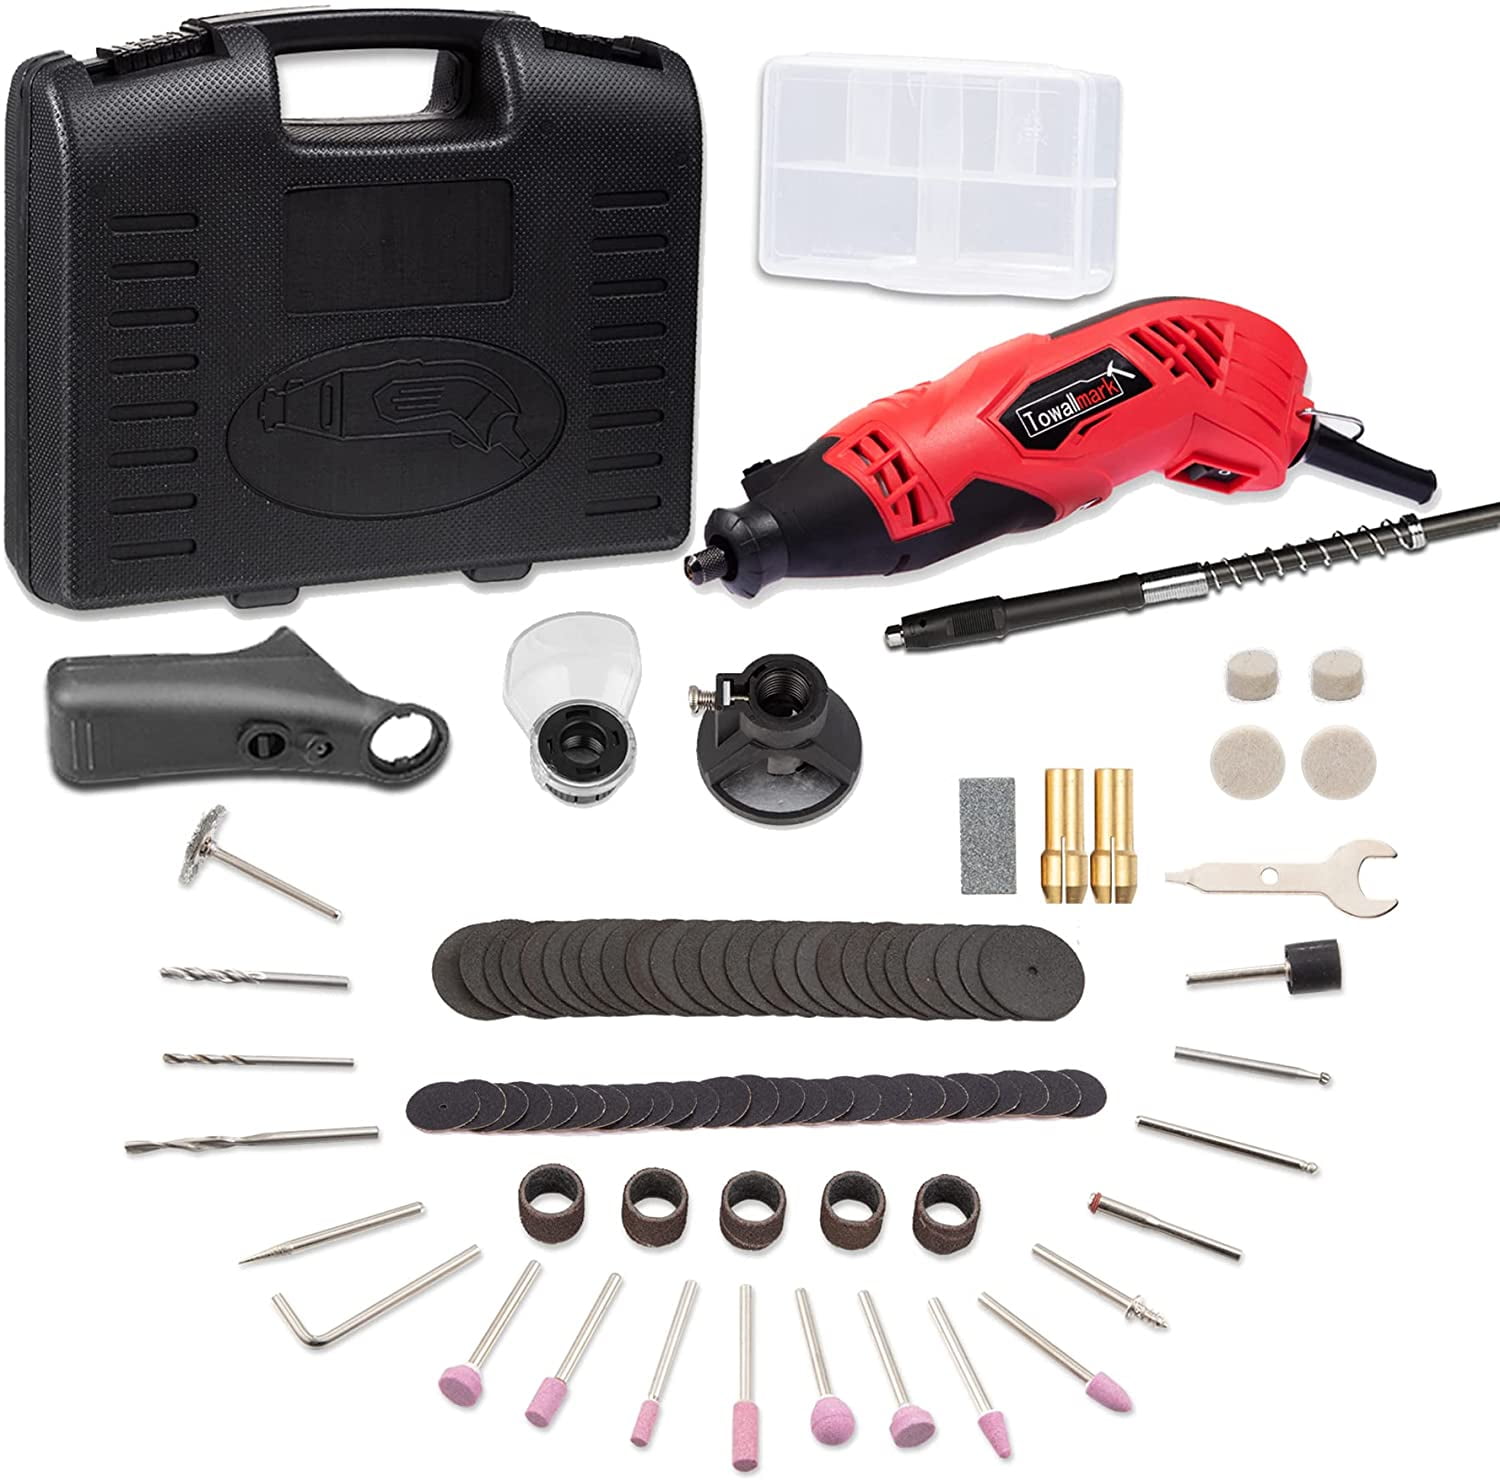 8V Cordless Rotary Tool Kit, NEU MASTER Power Rotary Tool With 2.0Ah  Batttery, 103pcs Accessories, 30000RPM 5-Speeds LED light, Multi Power  Carving